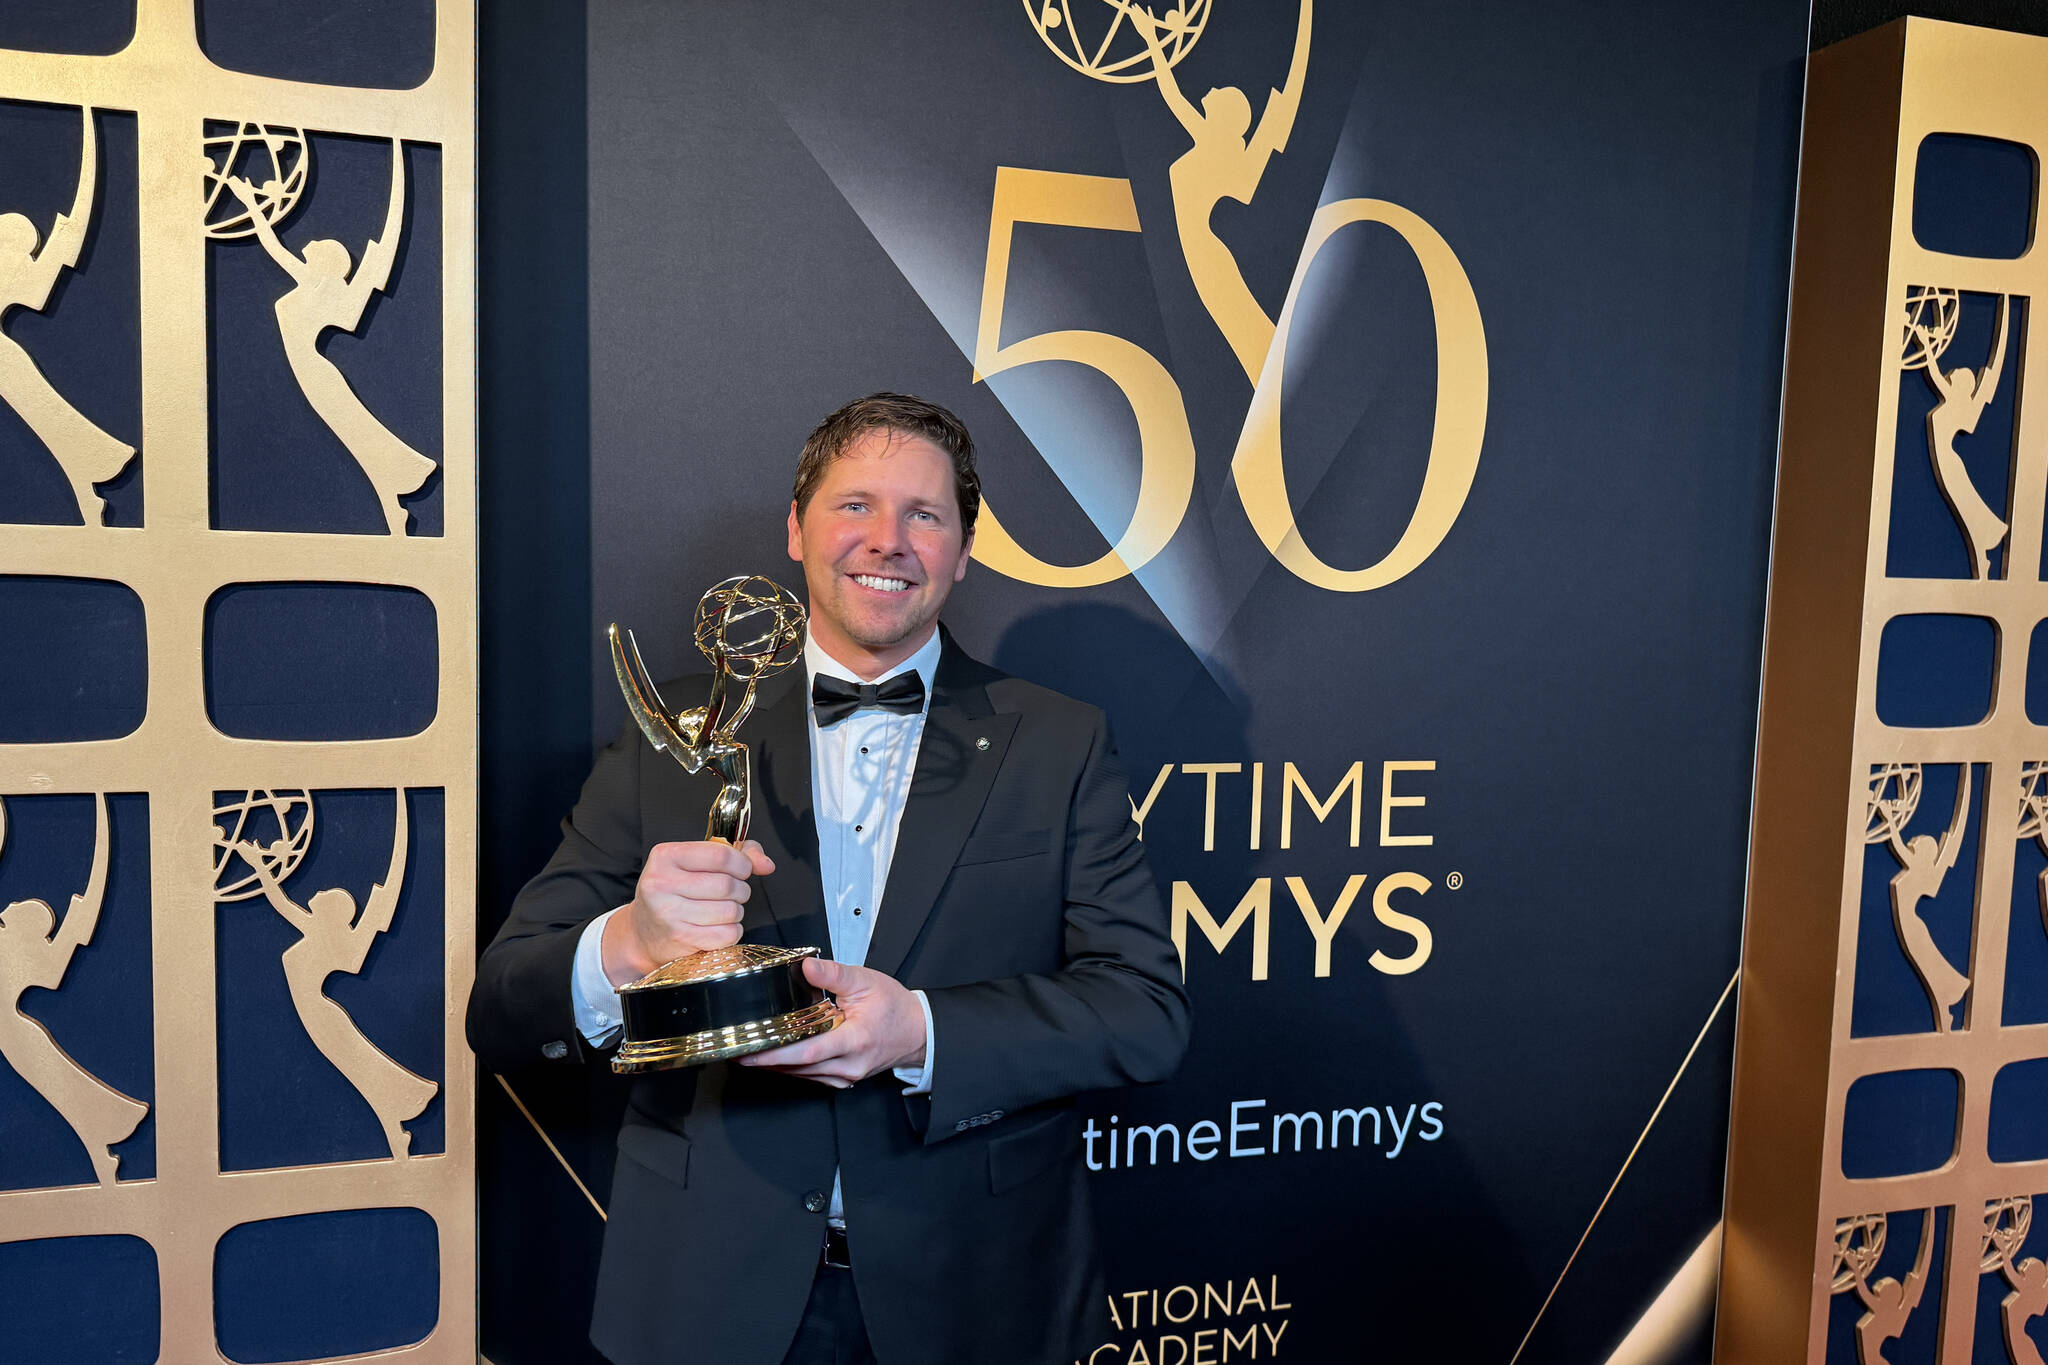 Maxwel Hohn recently won an Emmy for Cinematography in the 50th Daytime Emmy Awards (announced on Dec. 17) for his work on Island of The Sea Wolves which premiered on Netflix on Oct 13, 2022.